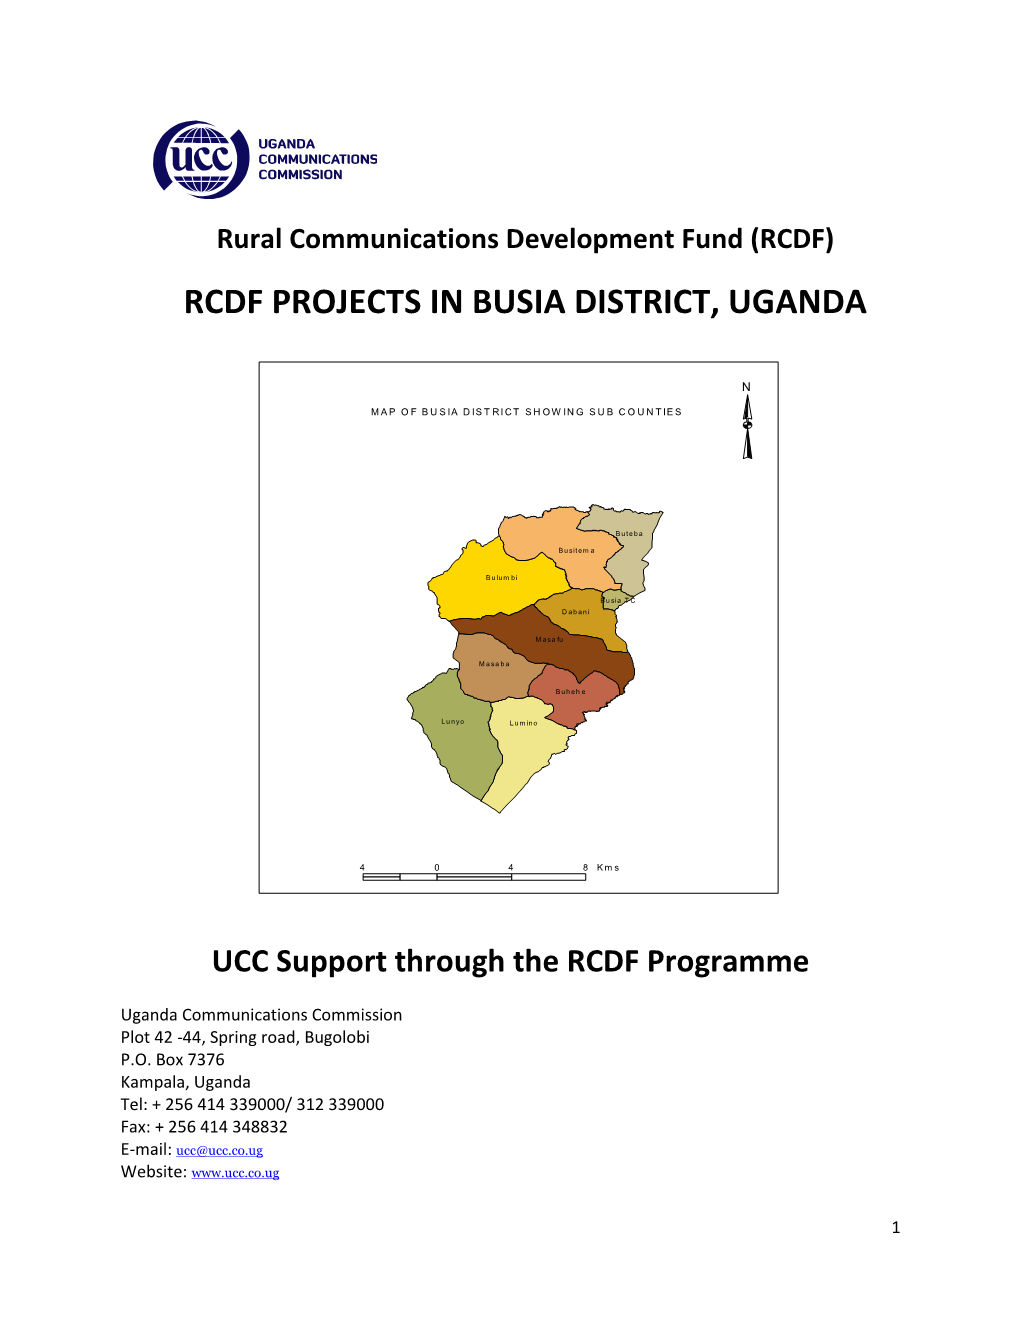 Rcdf Projects in Busia District, Uganda